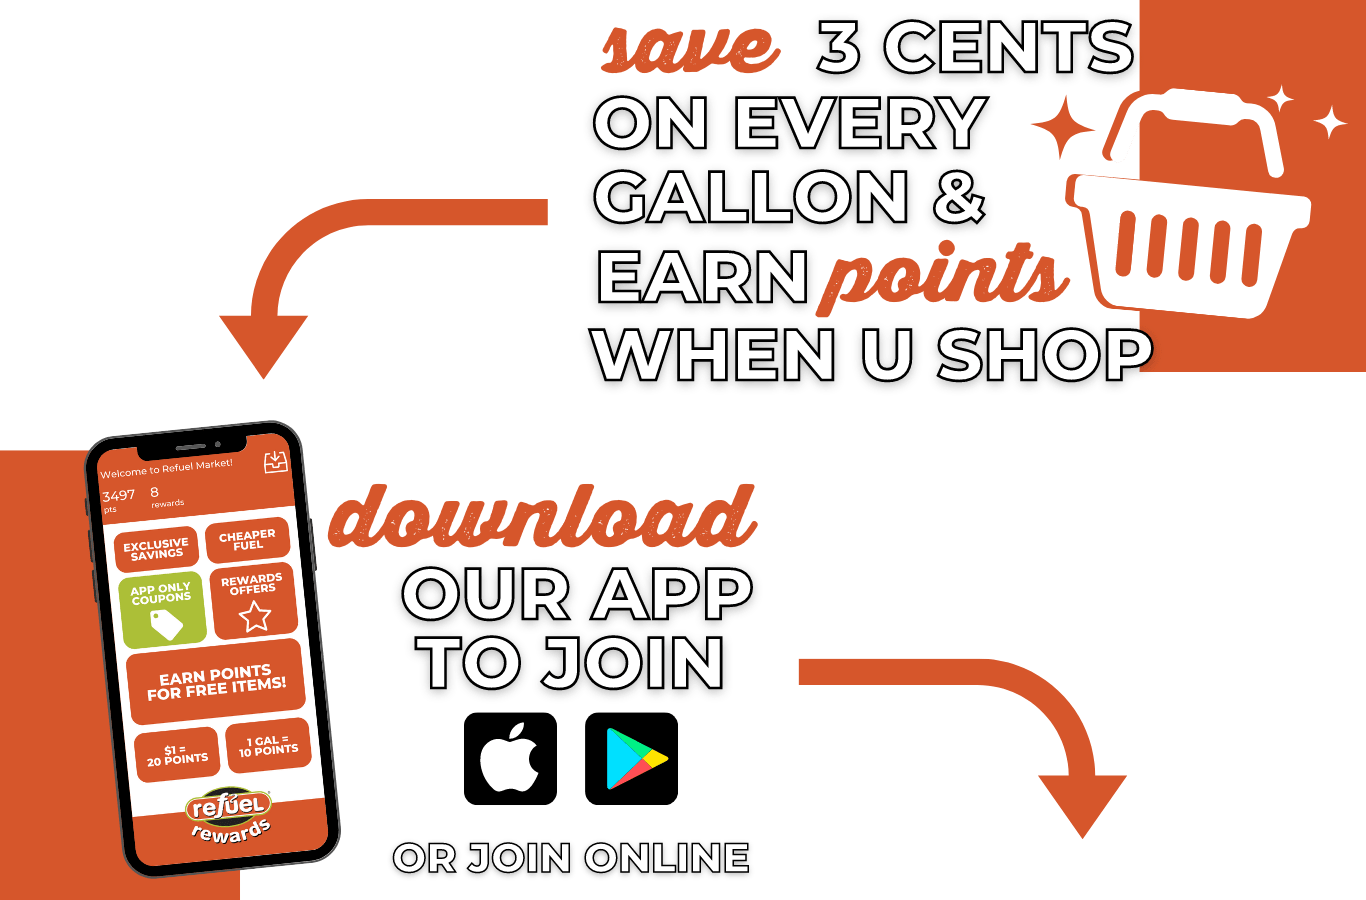 Save 3 cents on every gallon and earn points when you shop, download our app or join online.